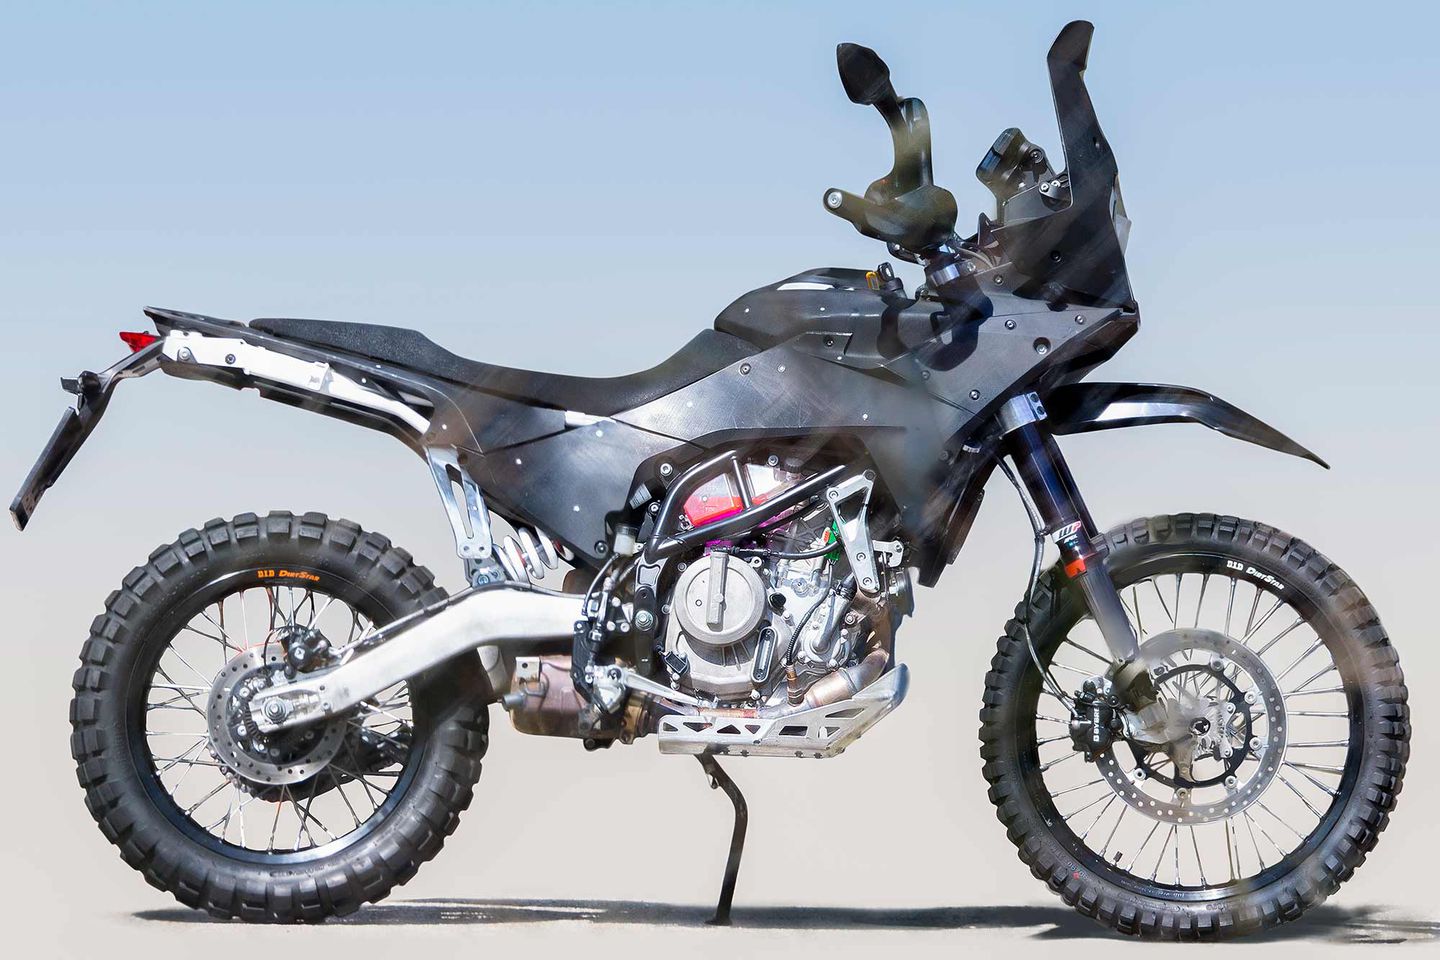 KTM Machines in the bid to figure out what the newest prototype from KTM is.